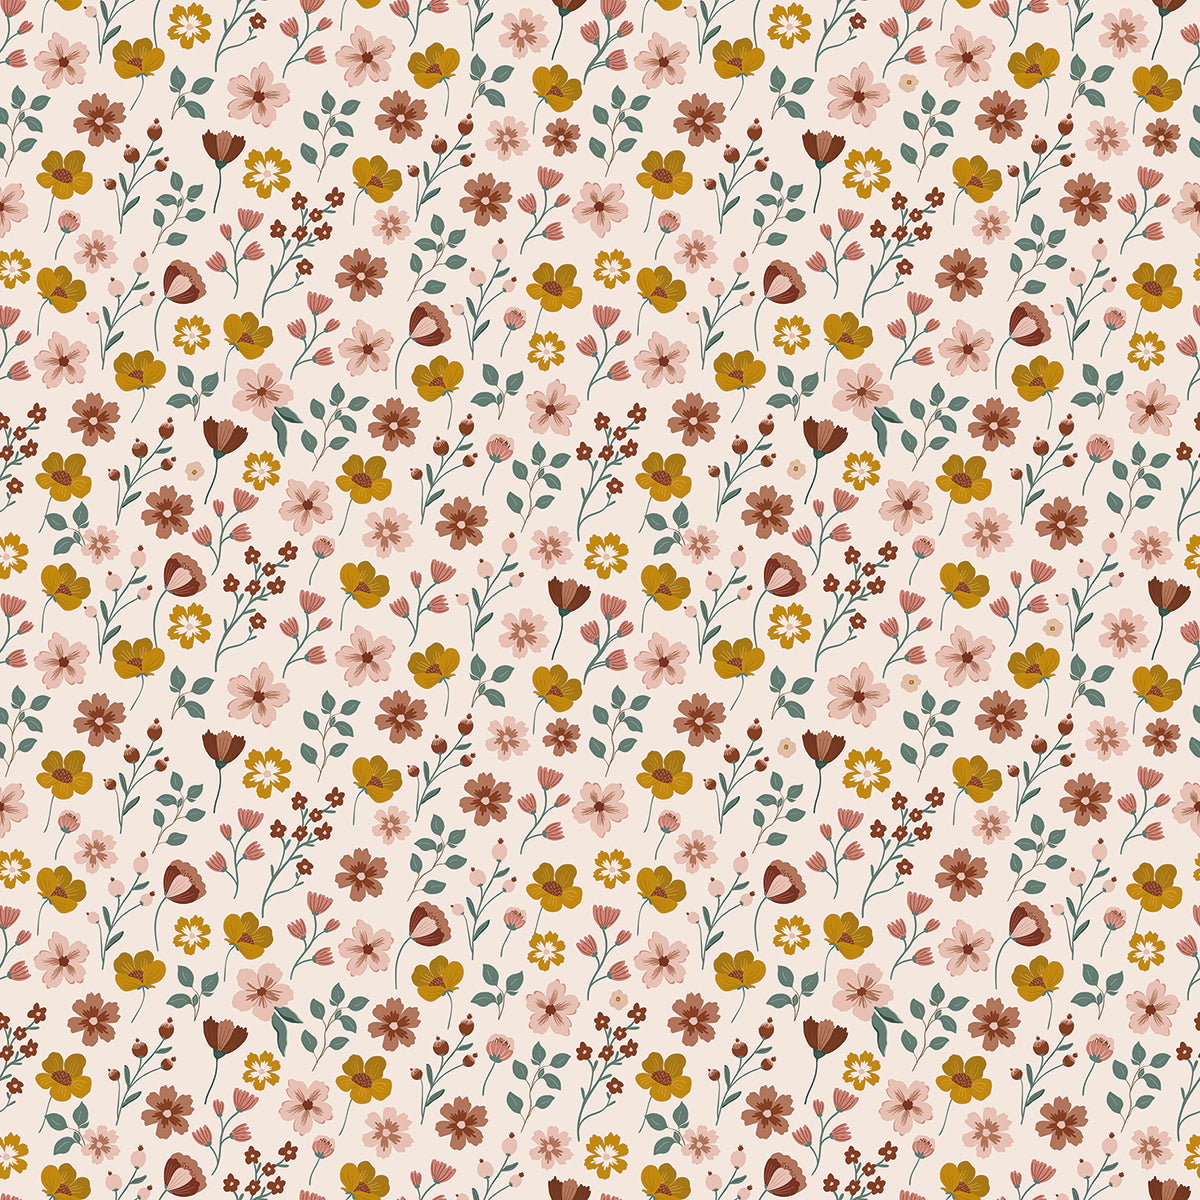 Free Vector  Ditsy floral print background  Vintage floral backgrounds  Floral background Floral pattern wallpaper